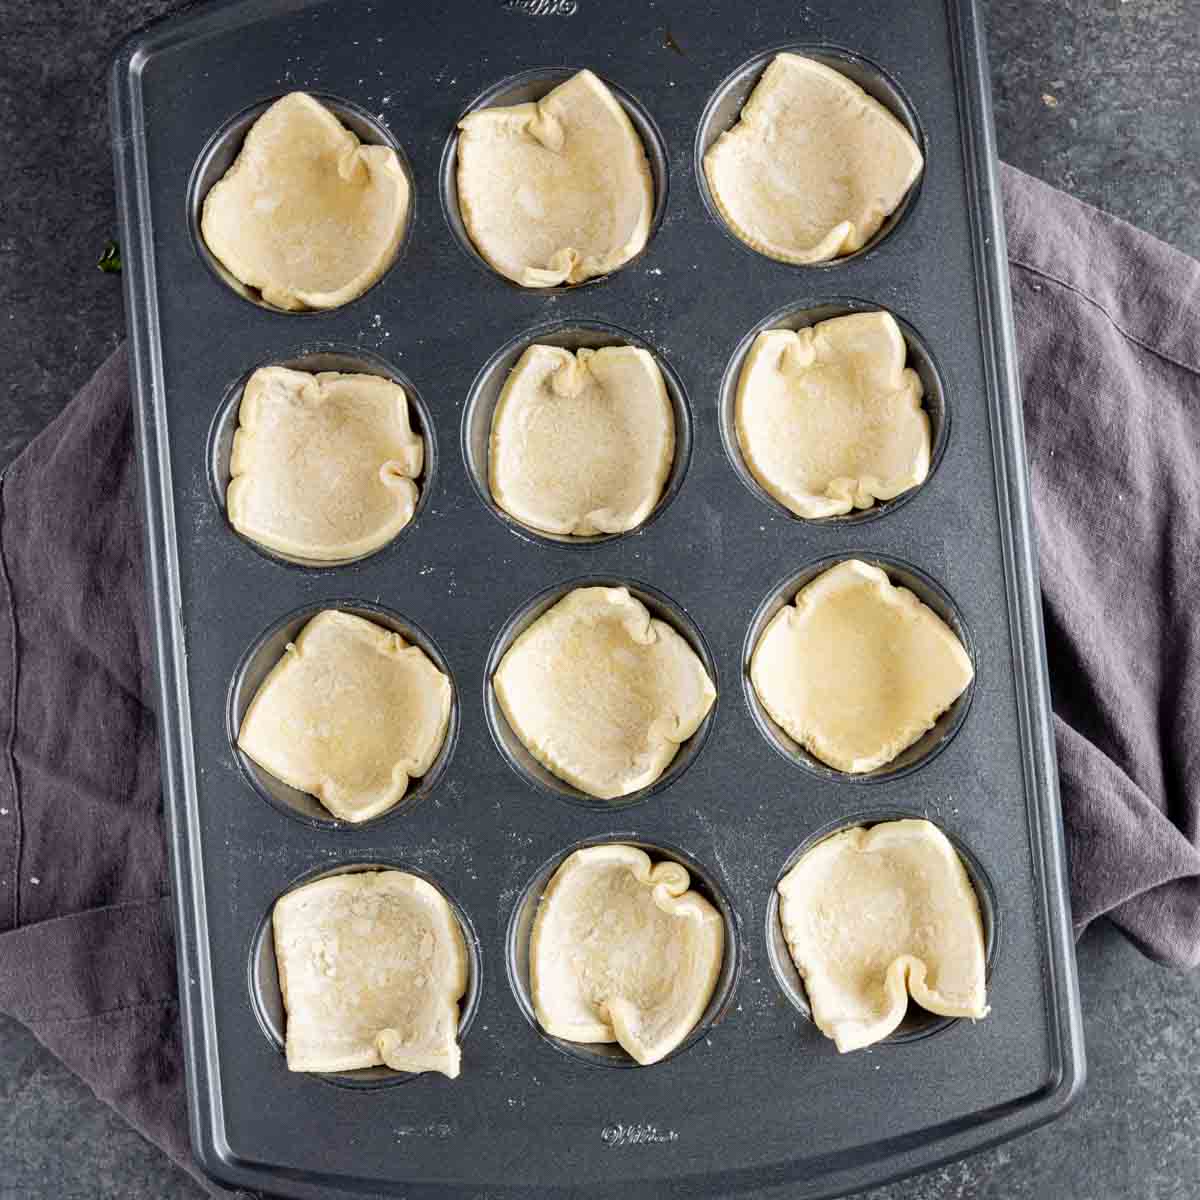 A muffin tin filled with dough for Spinach Puffs